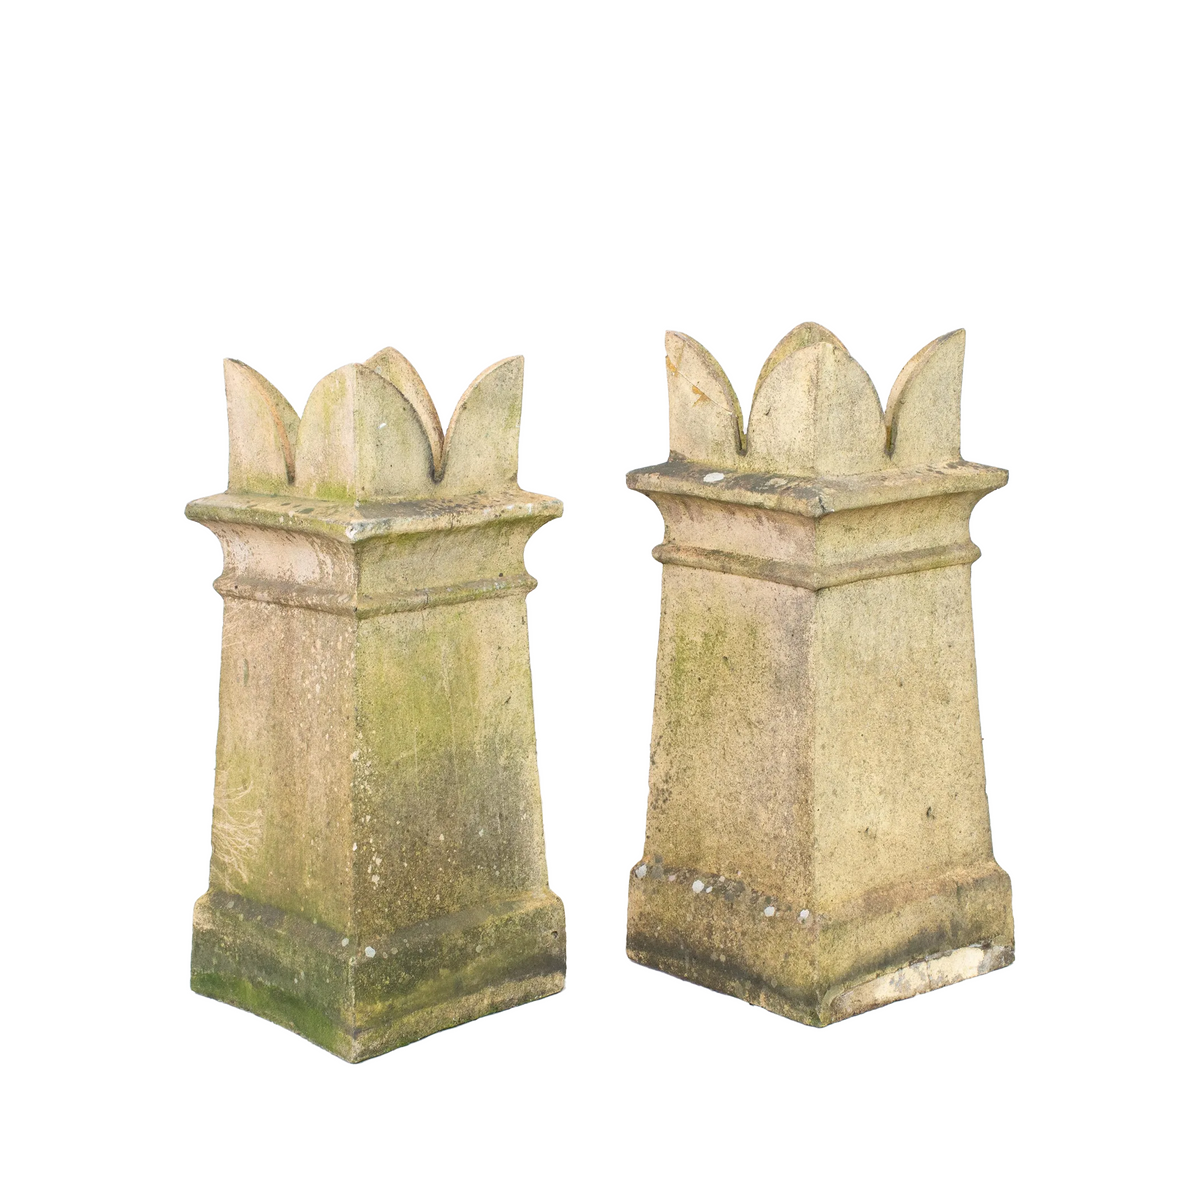 Pair of English Stone 4-Point Crown Top Chimney Pots